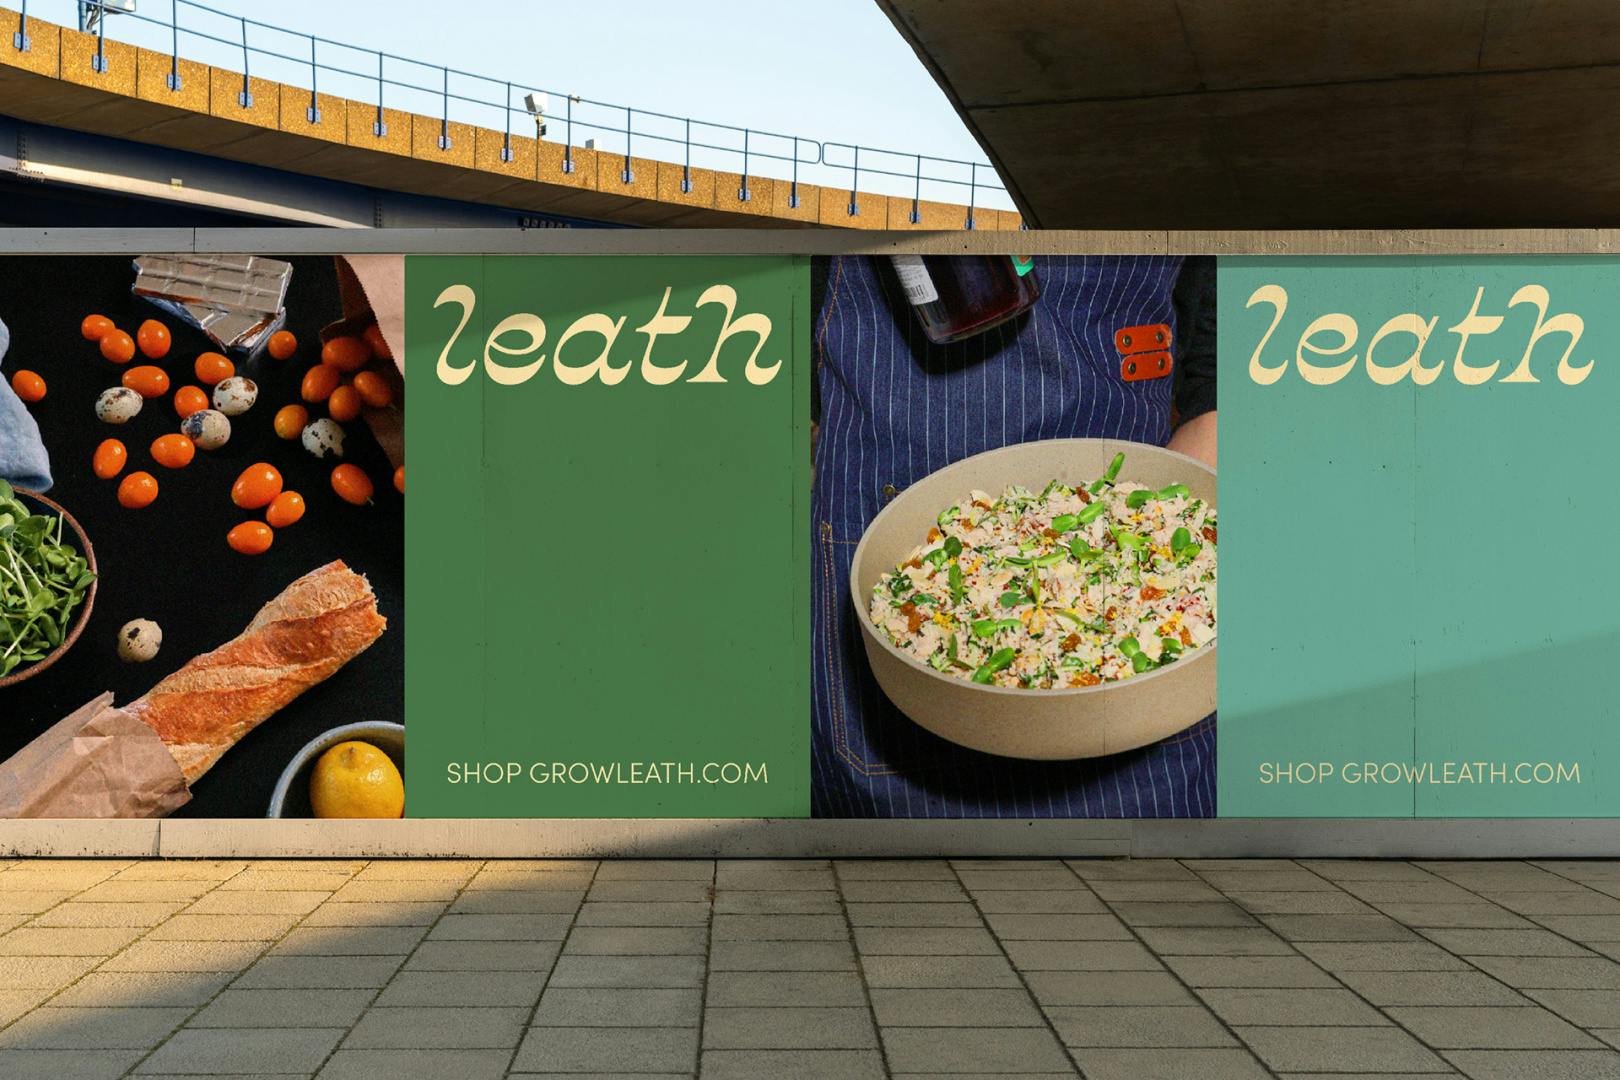 Image showing the branding for Leath, as seen on a billboard with the brand name written in an elaborate slanted typeface, alongside photos of food